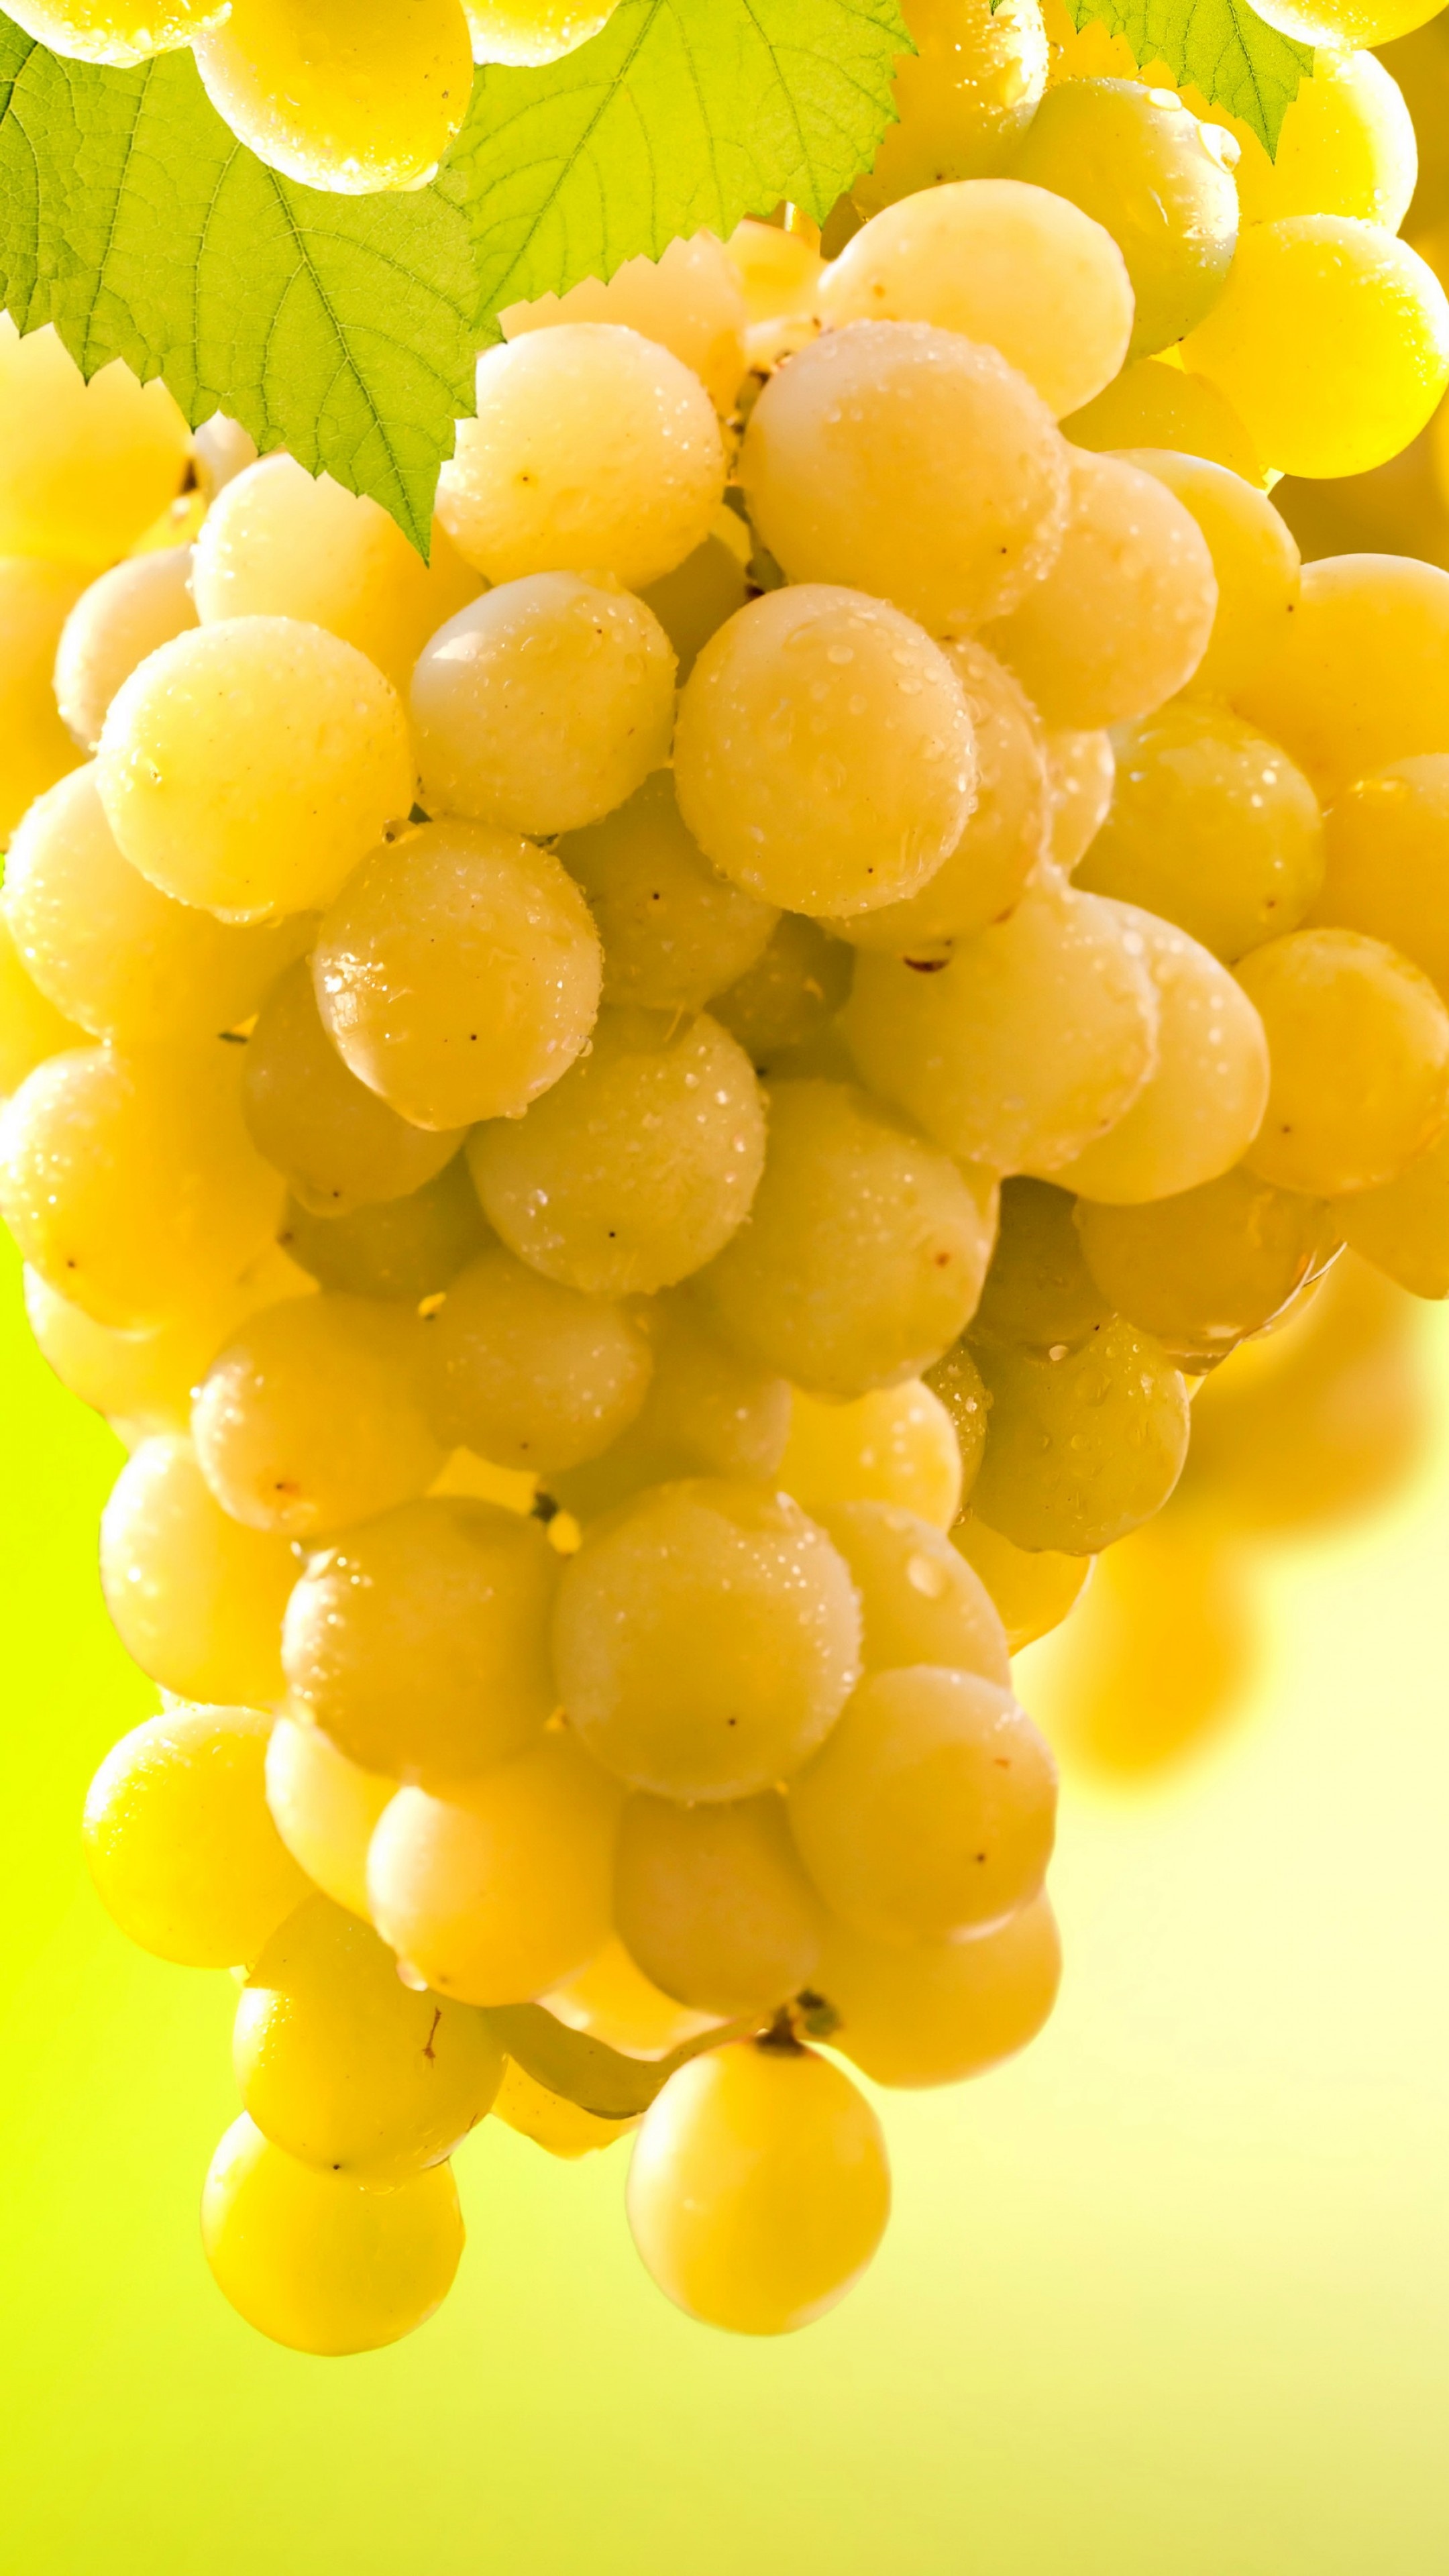 Grapes: A non-climacteric type of fruit. 2160x3840 4K Wallpaper.